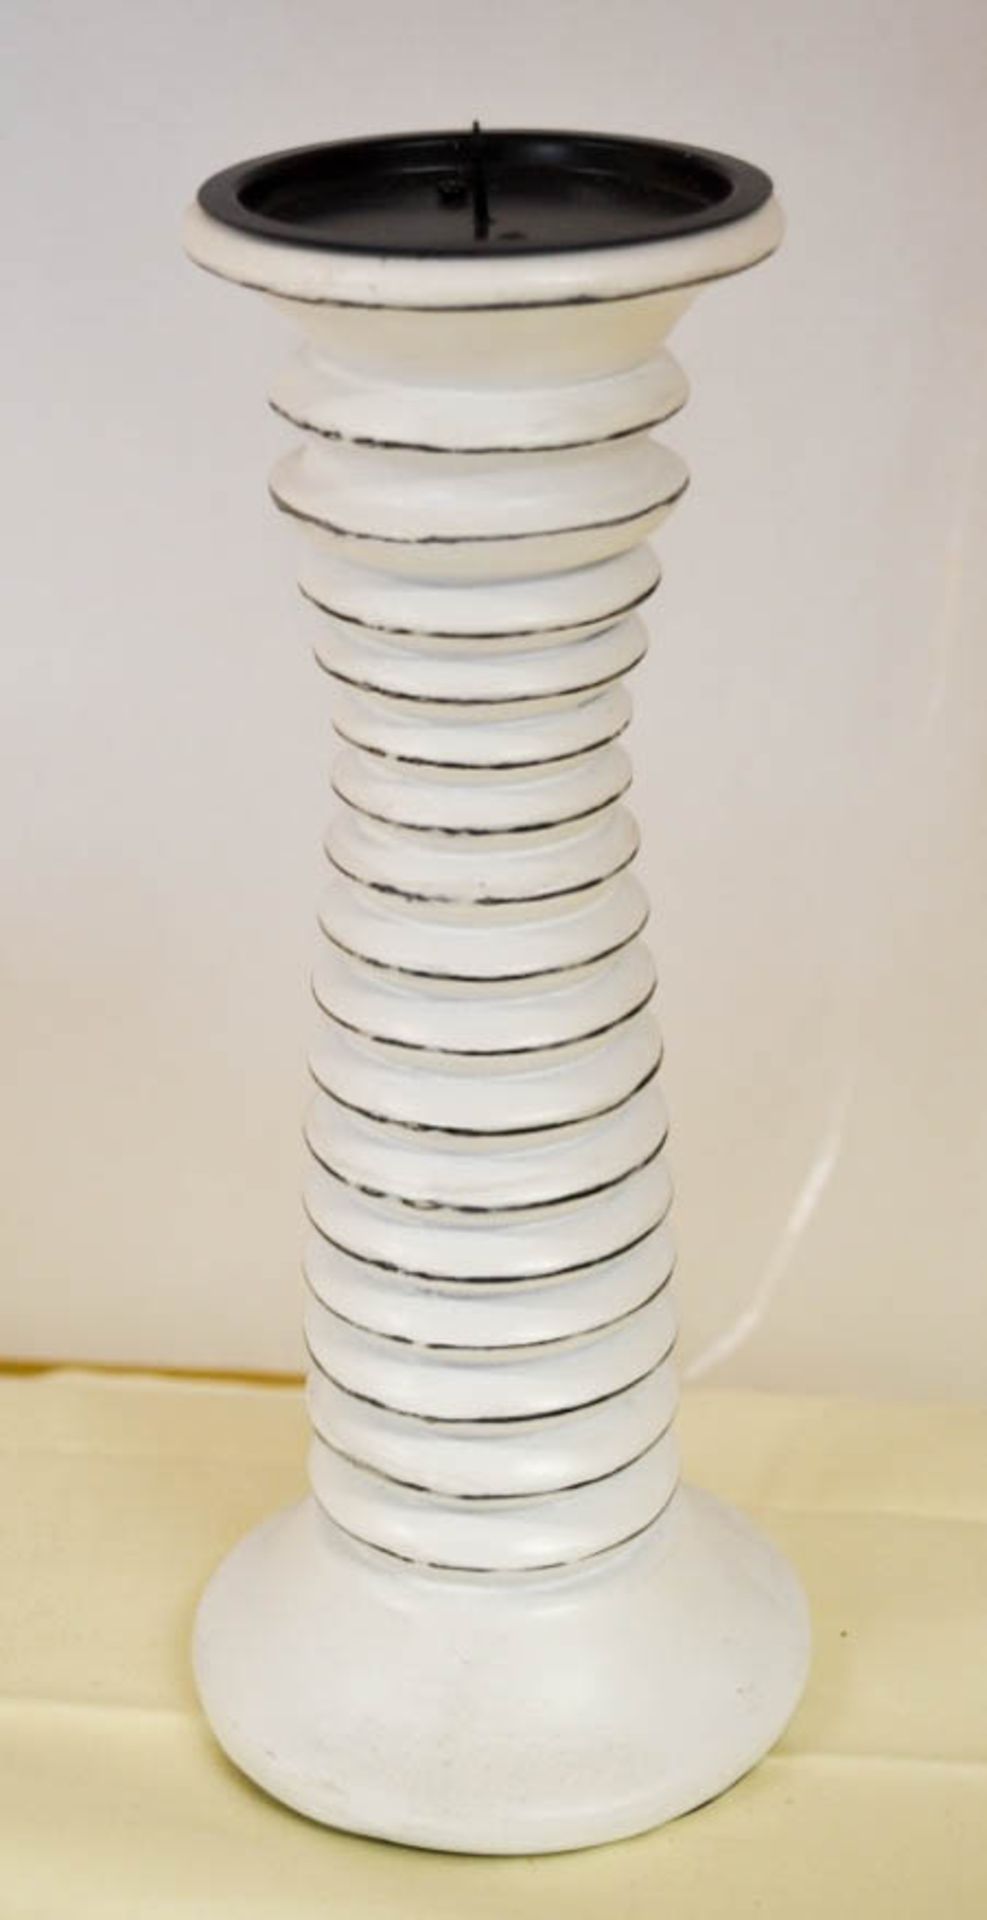 Pallet of round based candlesticks